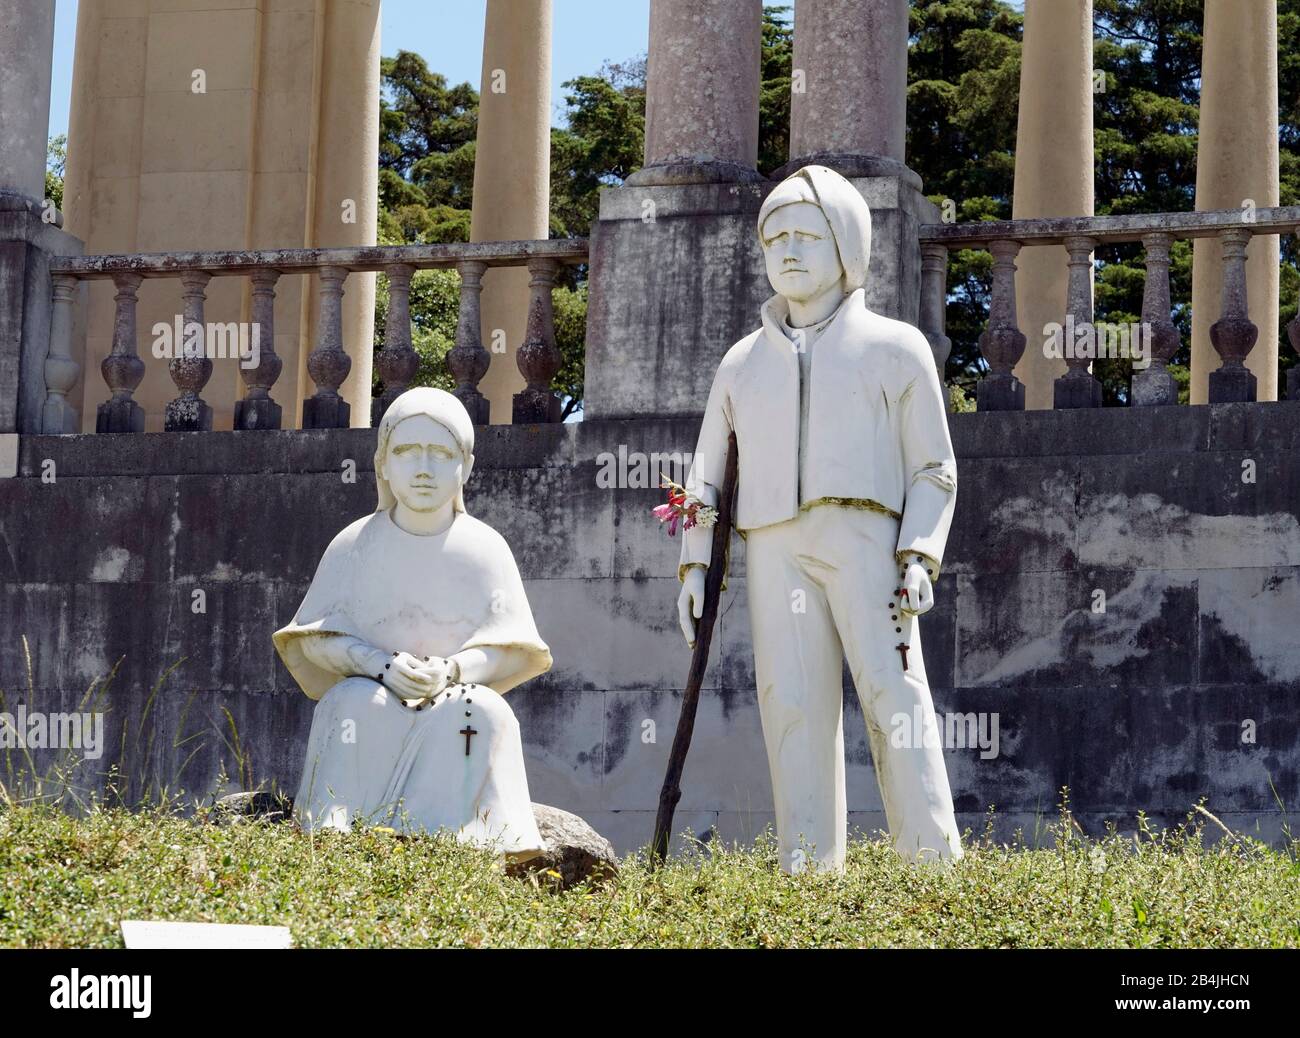 Europe, Portugal, Centro region, Fatima, Catholic sanctuary, statues of the shepherd children jacinta and Francisco, who saw the apparitions of Mary Stock Photo